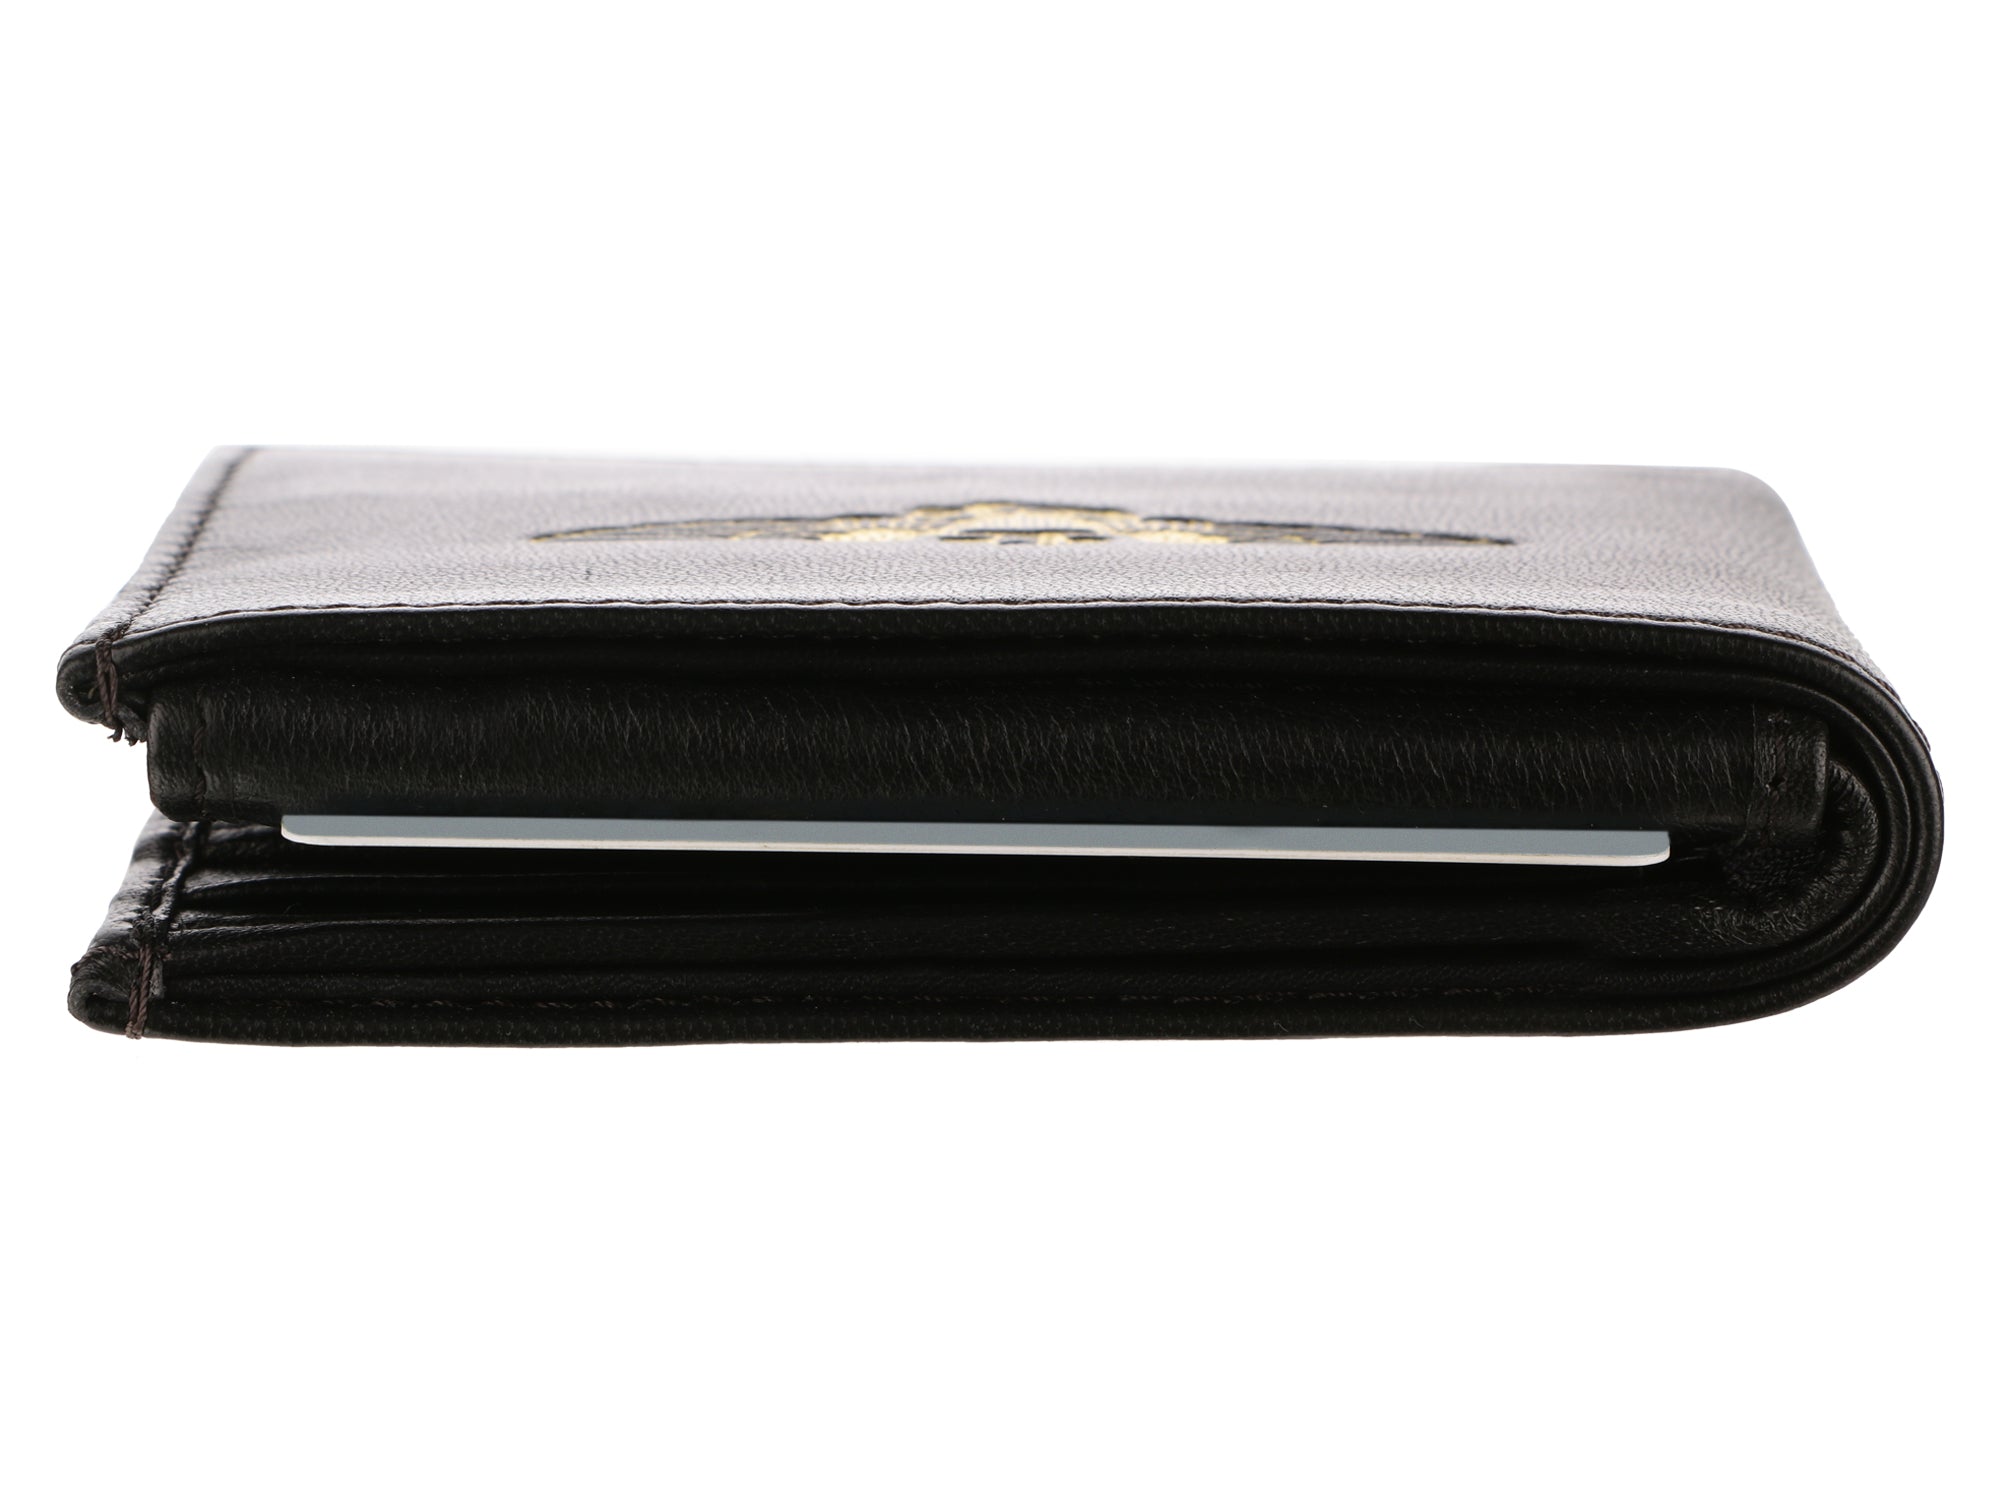 Image of FRED HESS MENS WALLET. it is quiet slim and convenient to use